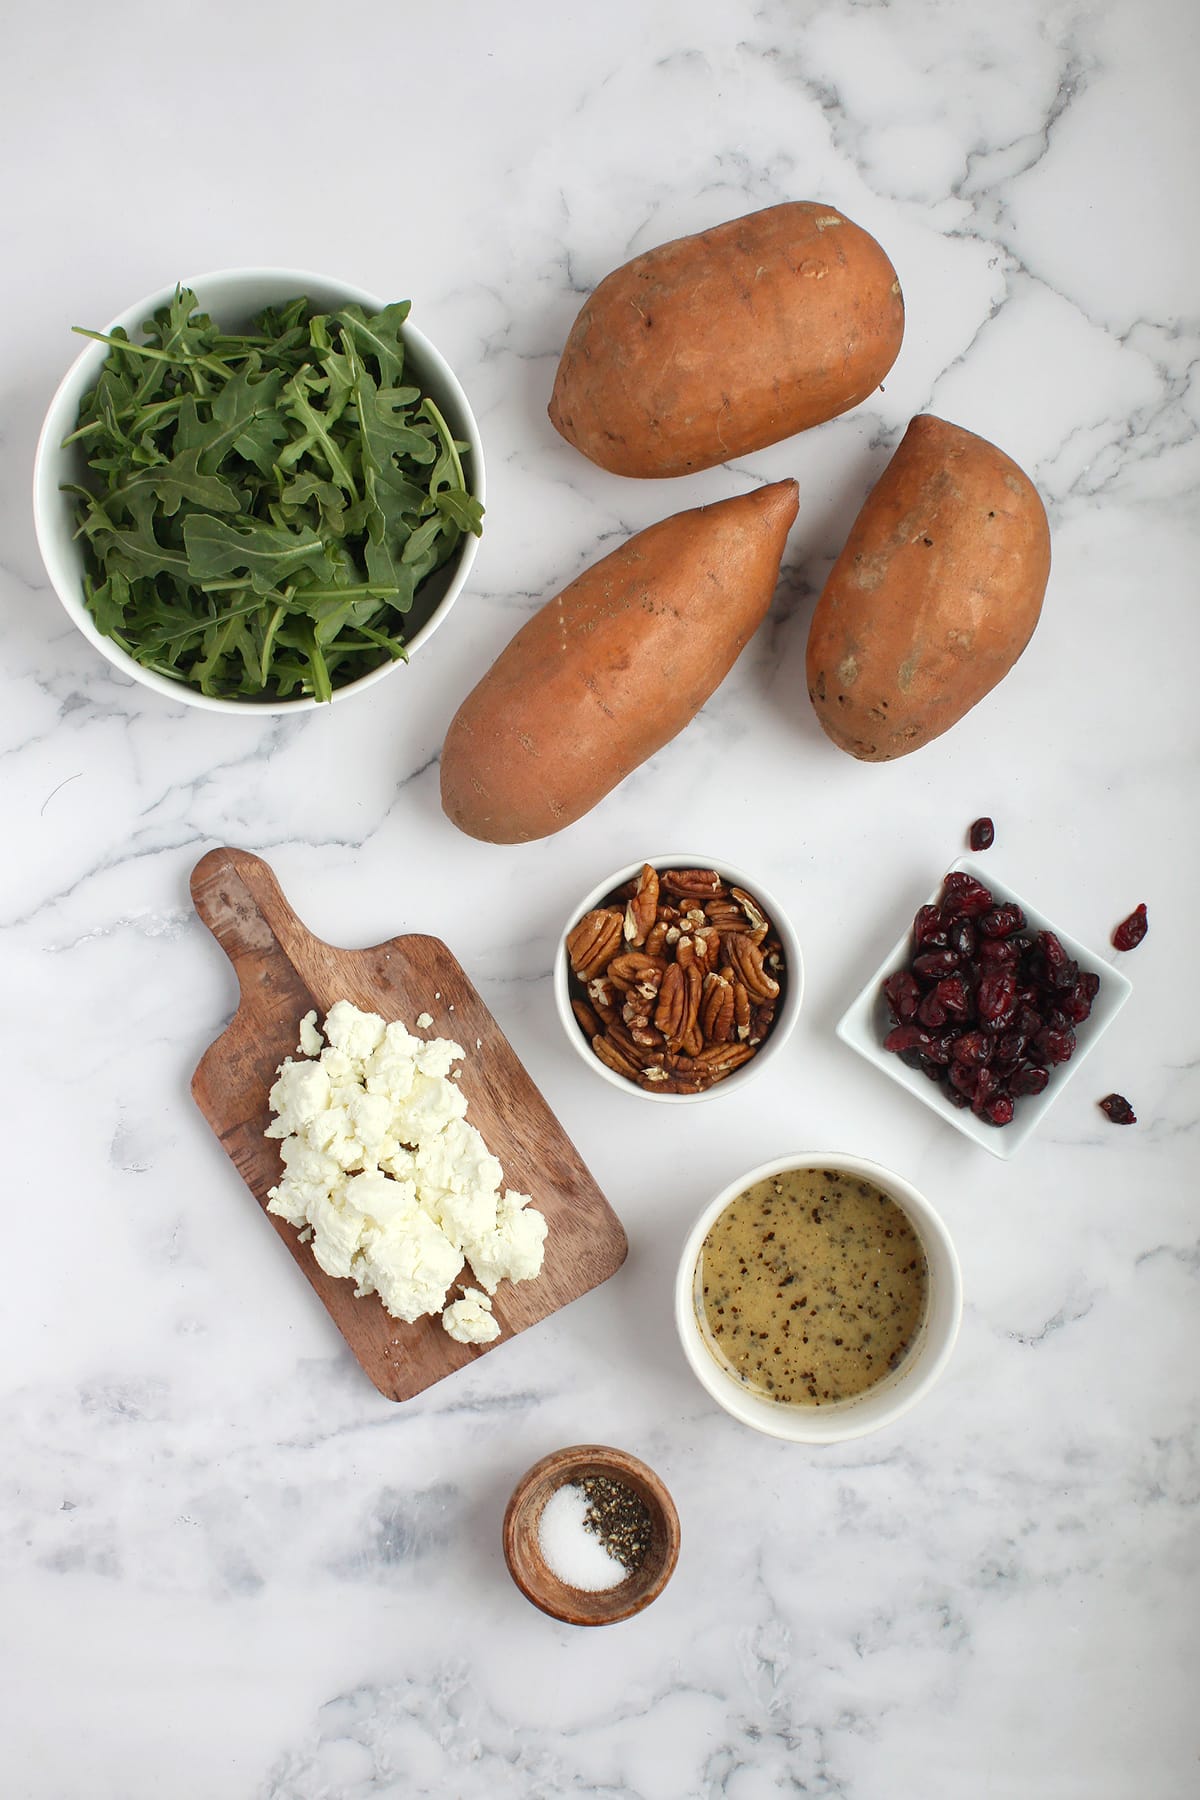 Ingredients needed to make sweet potato salad with arugula and goat cheese.